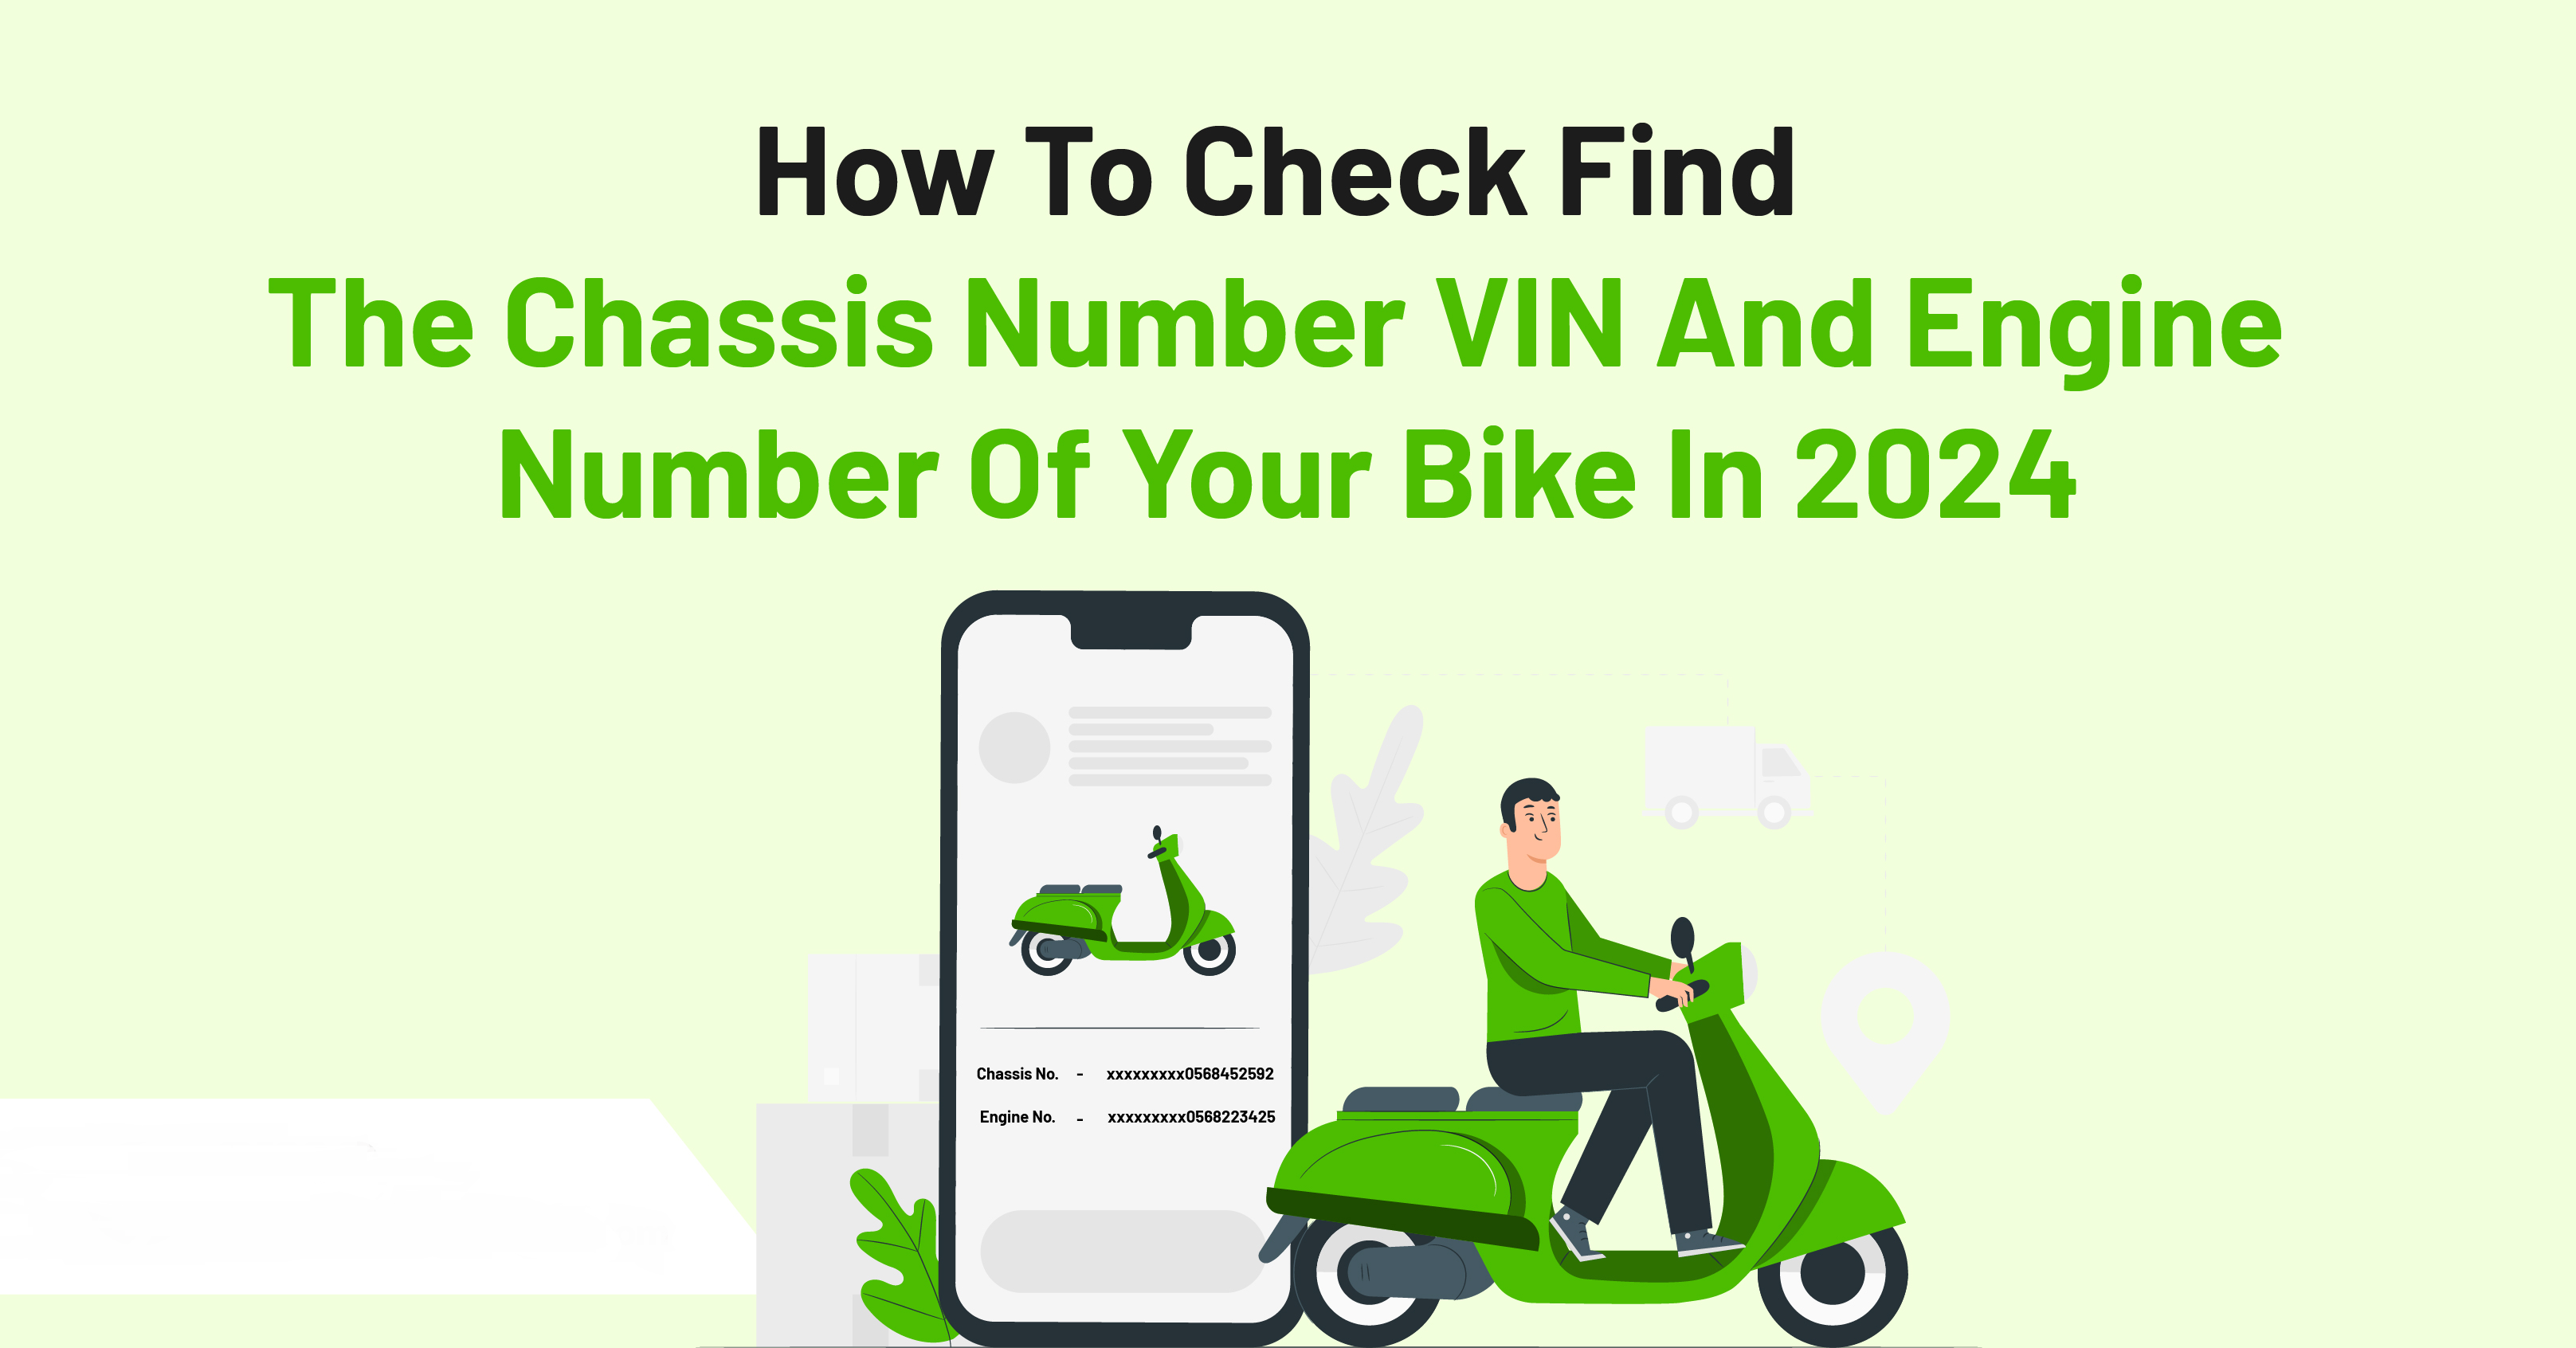 How To Check/Find The Chassis Number, VIN And Engine Number Of Your Bike